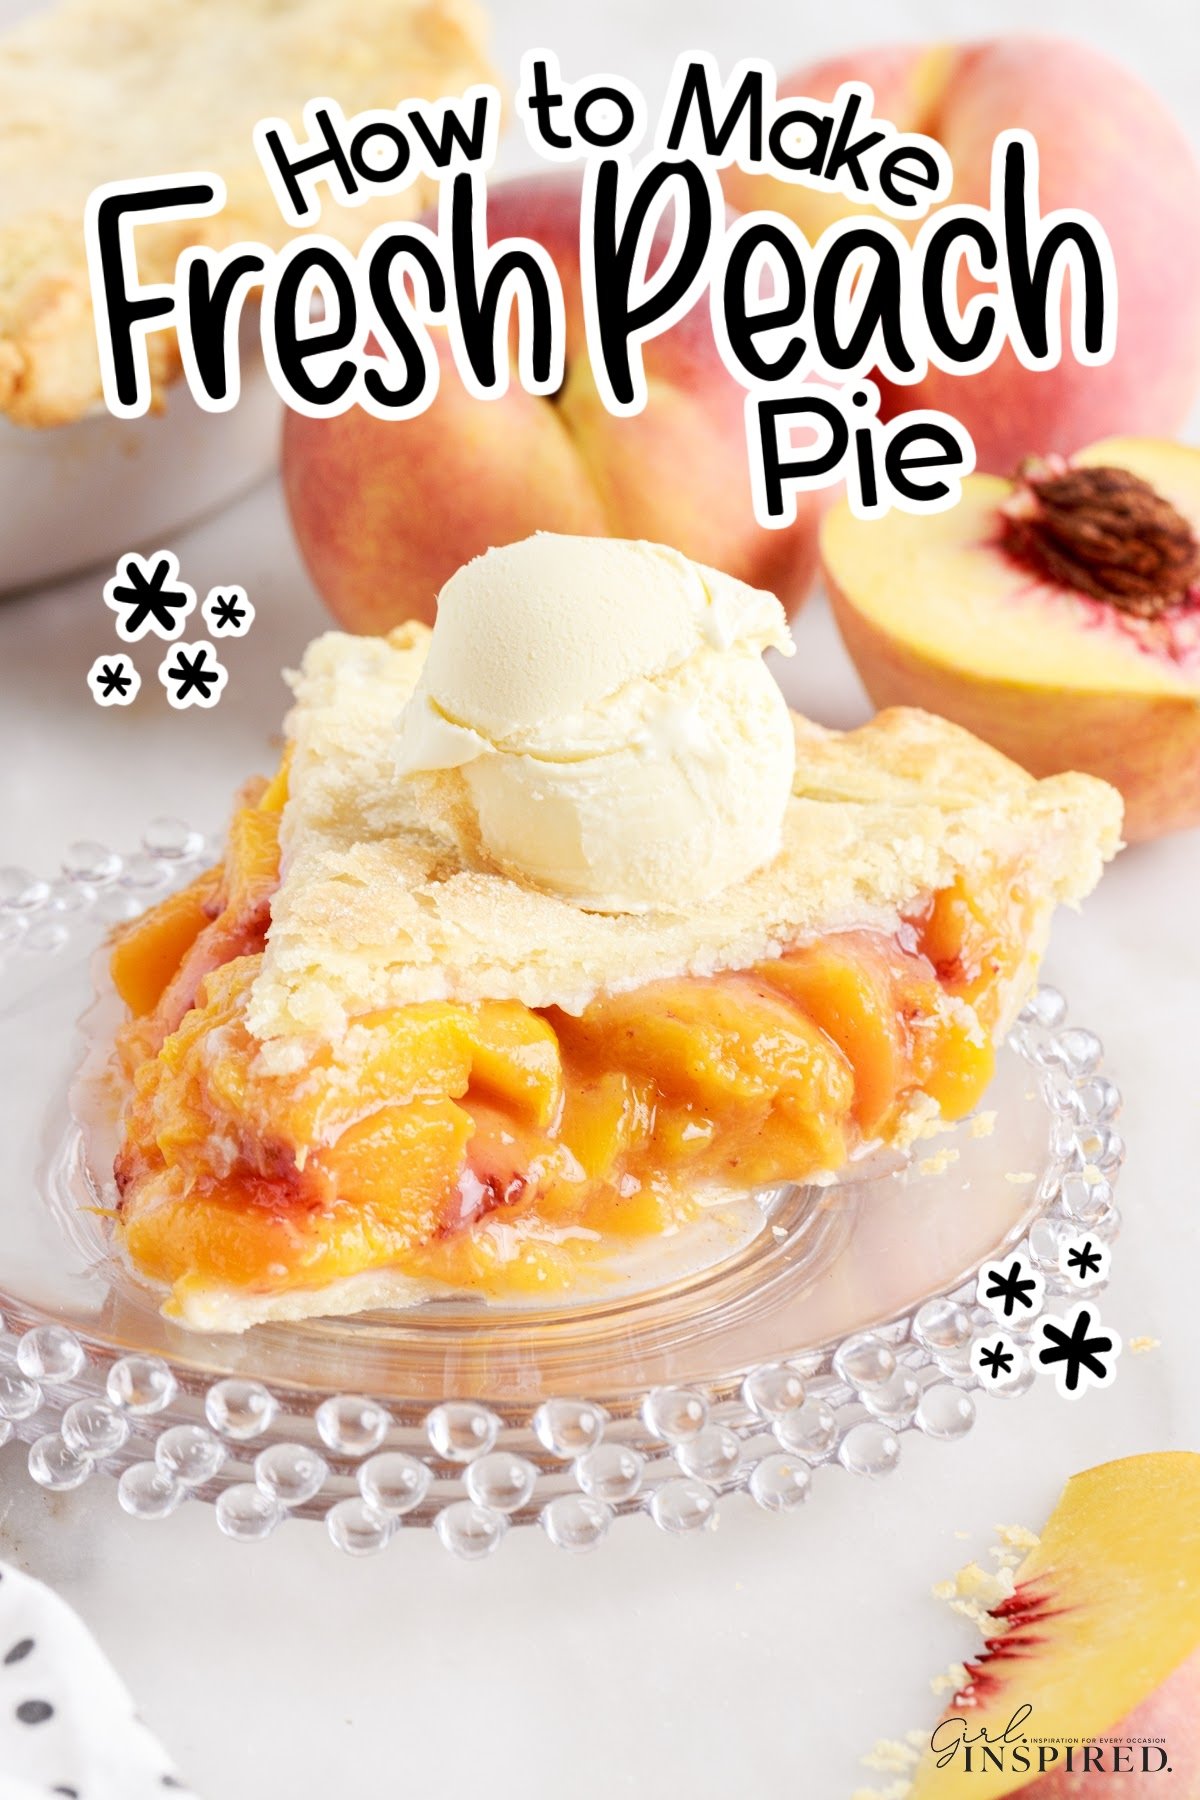 Slice of Fresh Peach Pie on a plate with ice cream on top, and text overlay.